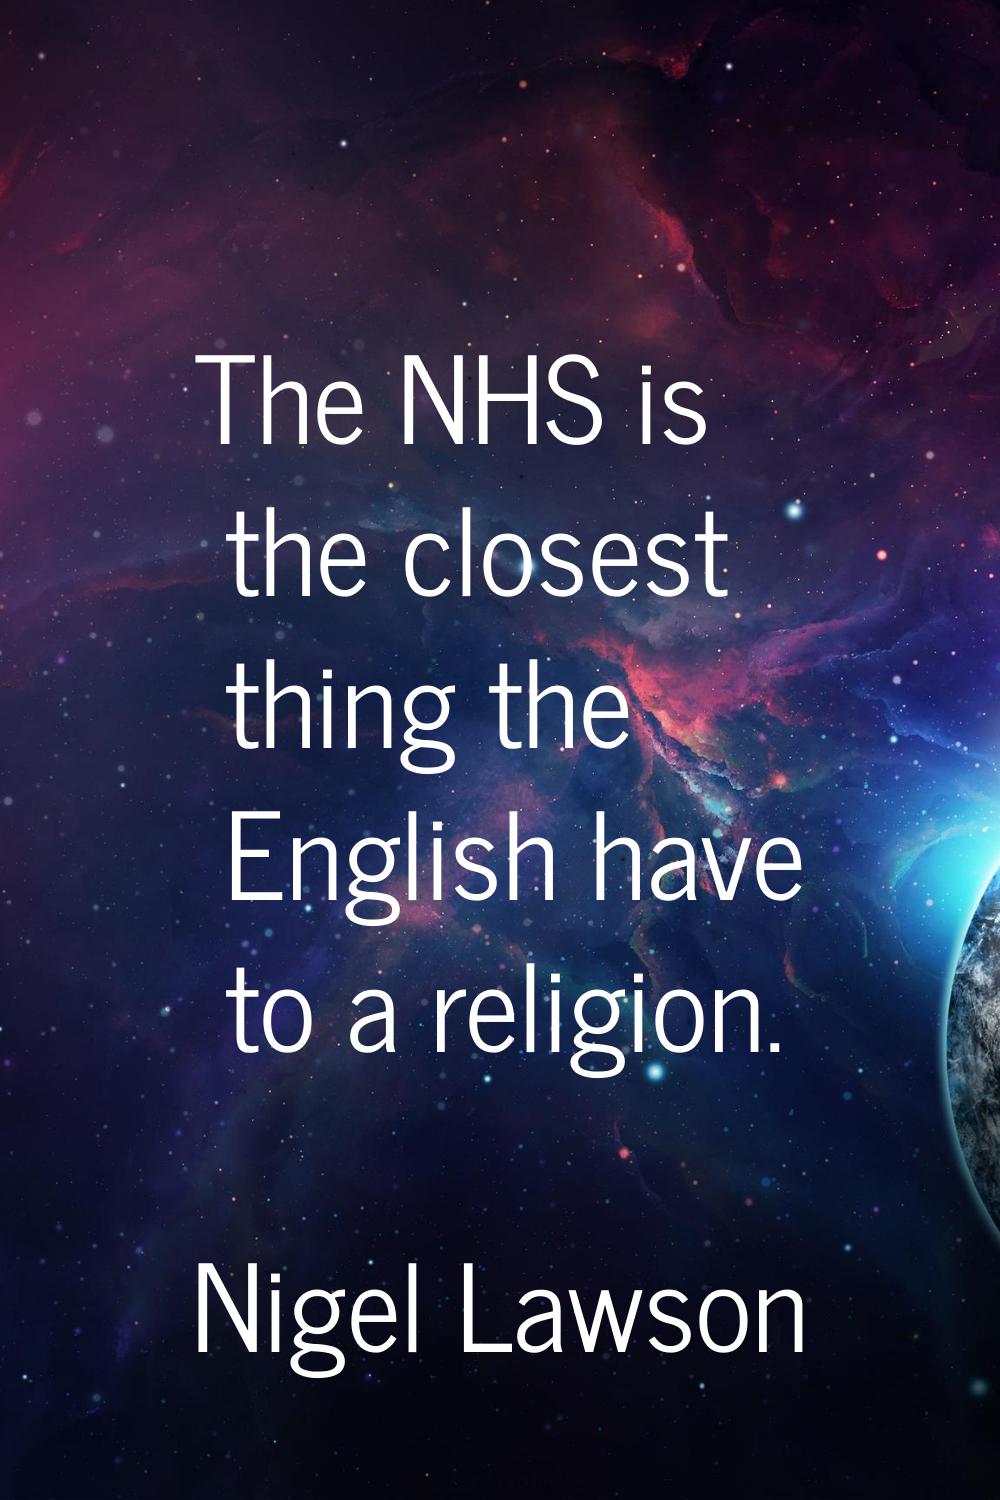 The NHS is the closest thing the English have to a religion.